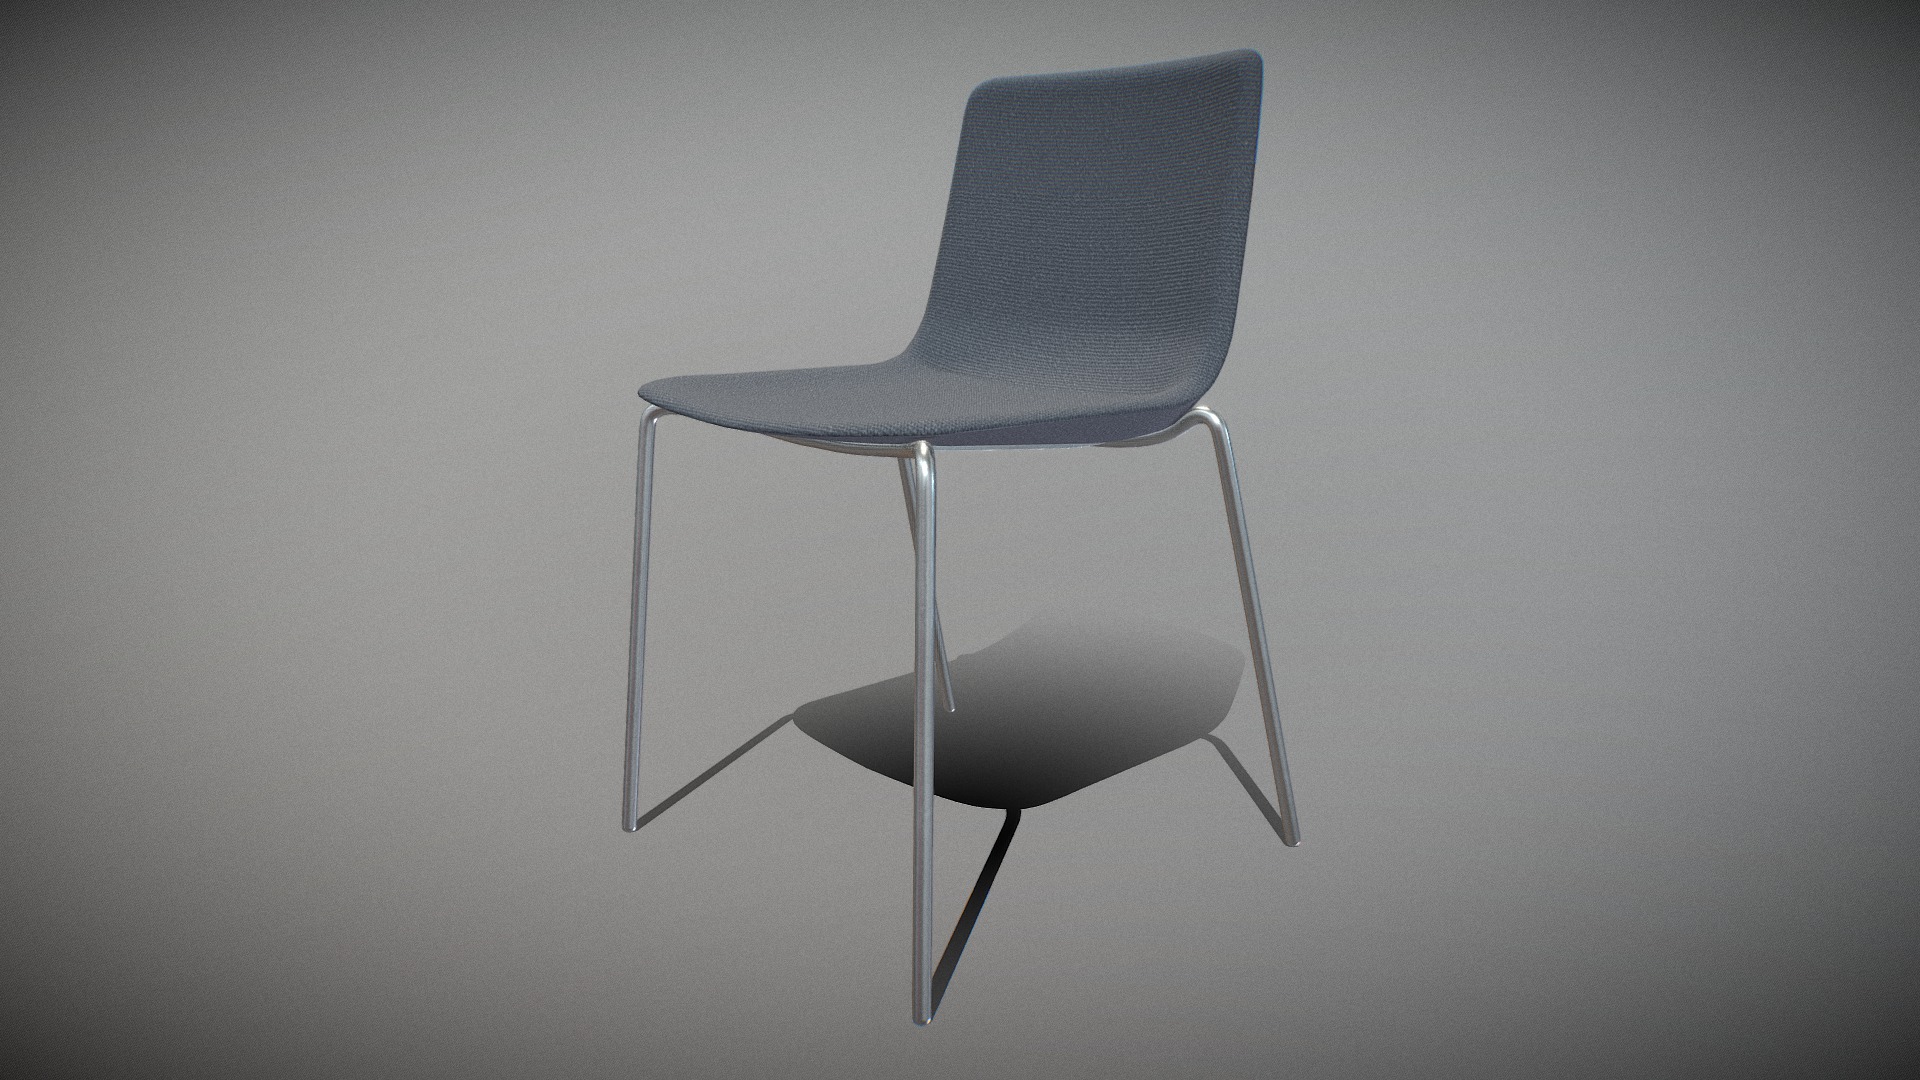 3D model Pato 4 Leg-Chair Model-4202 Chrome - This is a 3D model of the Pato 4 Leg-Chair Model-4202 Chrome. The 3D model is about a chair with a cushion.